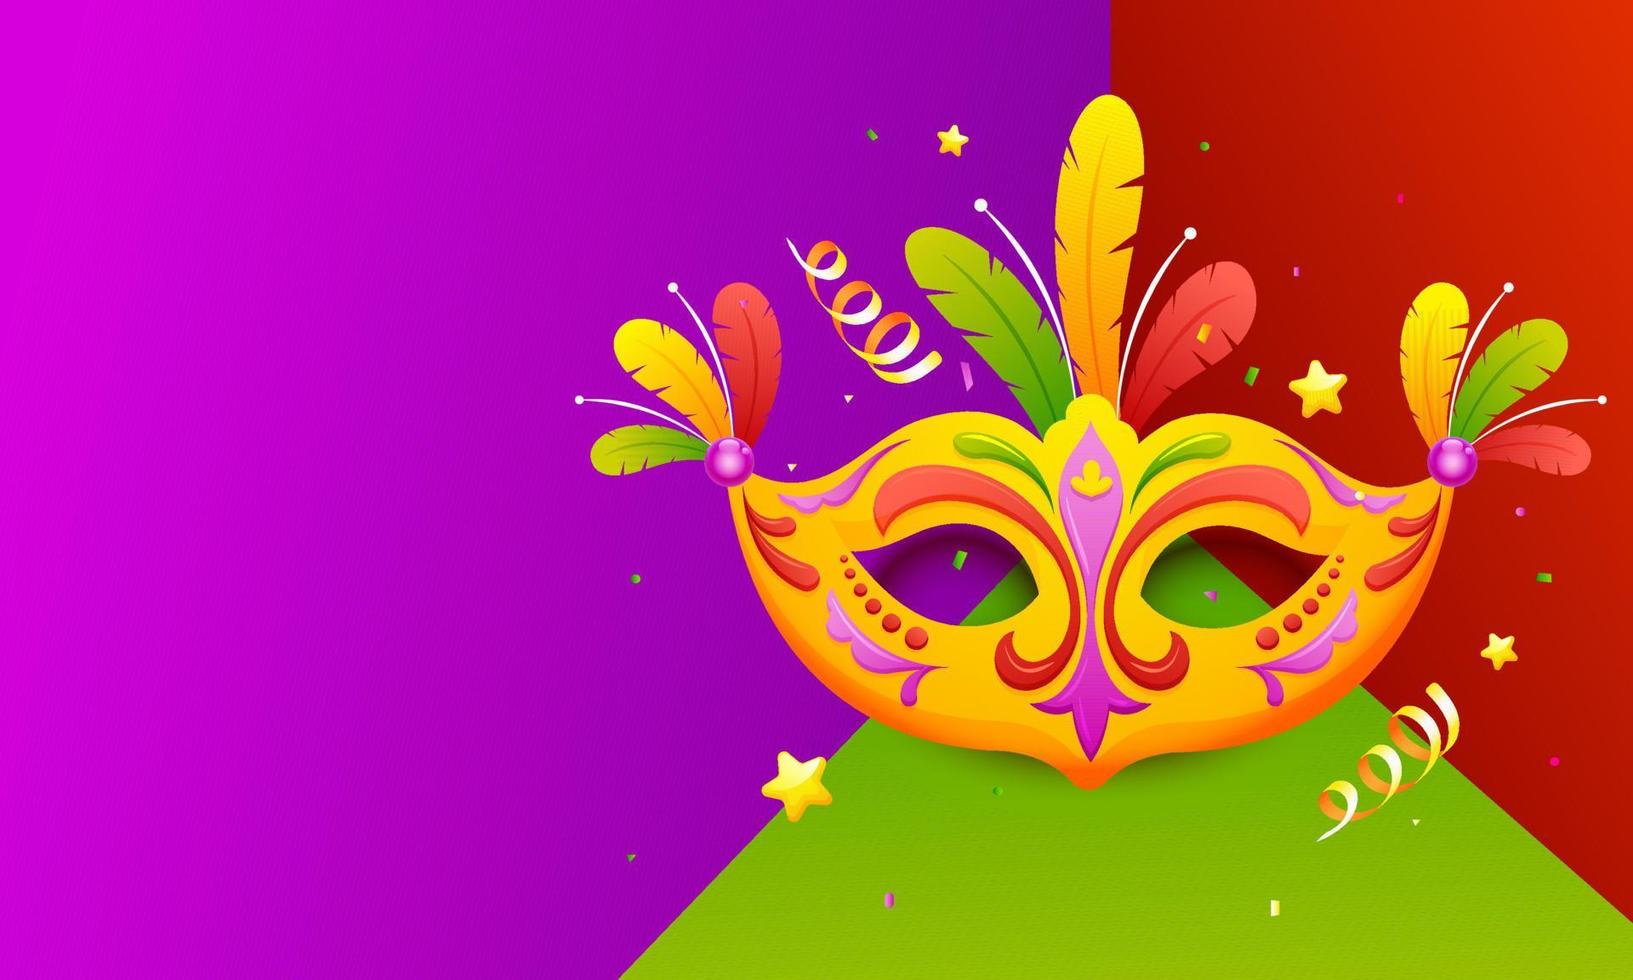 Illustration of Party Mask with Feather and Confetti on Colorful Abstract Background. vector